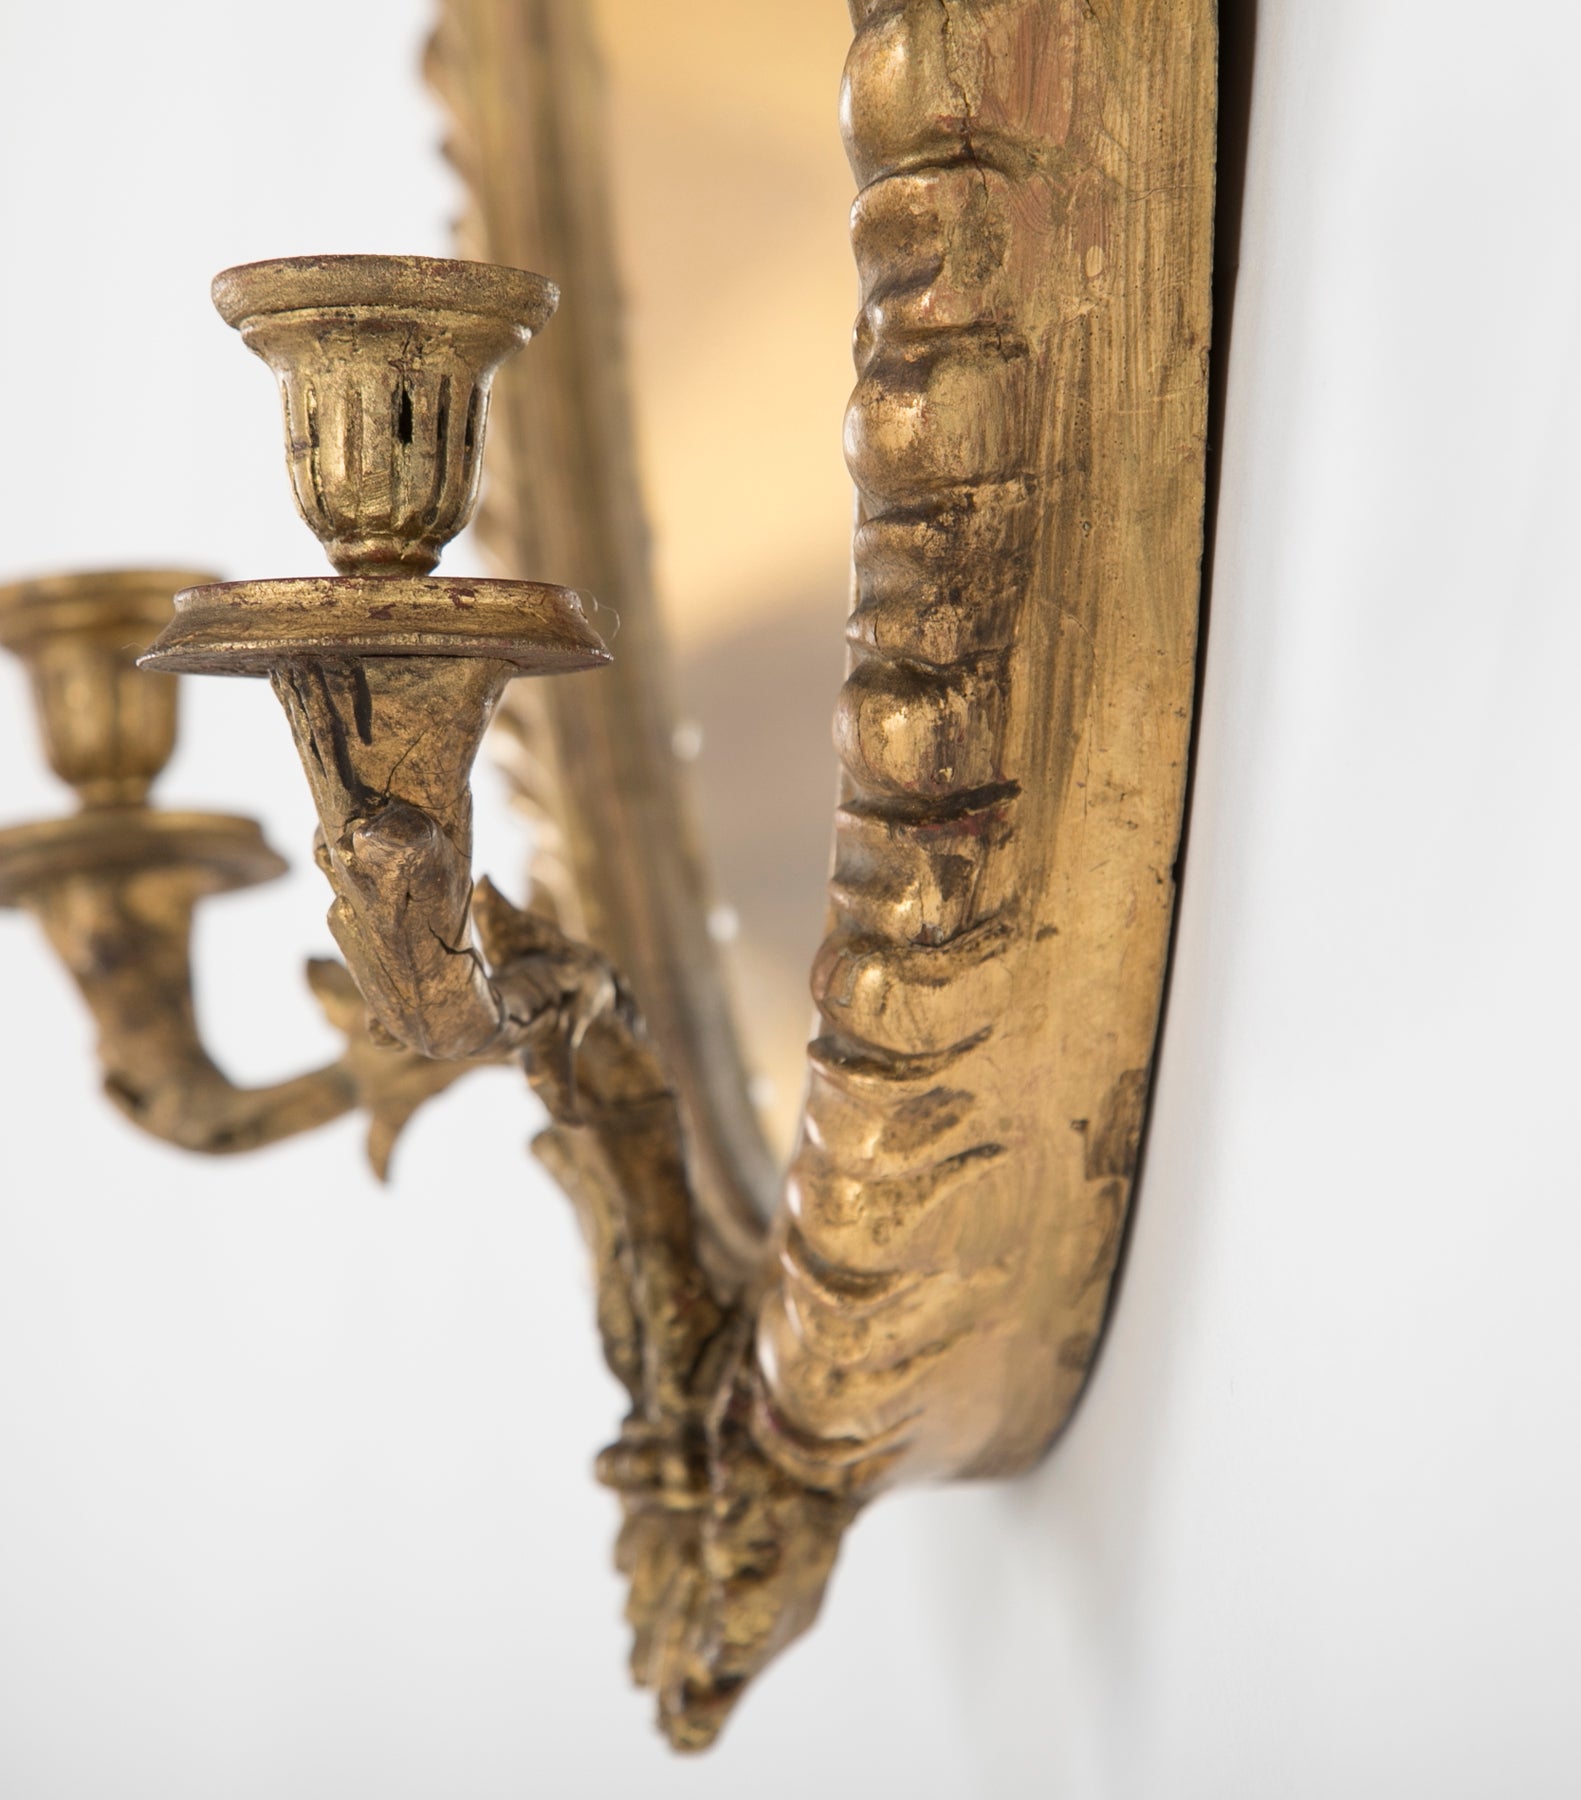 Regency Period Pair of Carved & Gilt Mirrored Sconces